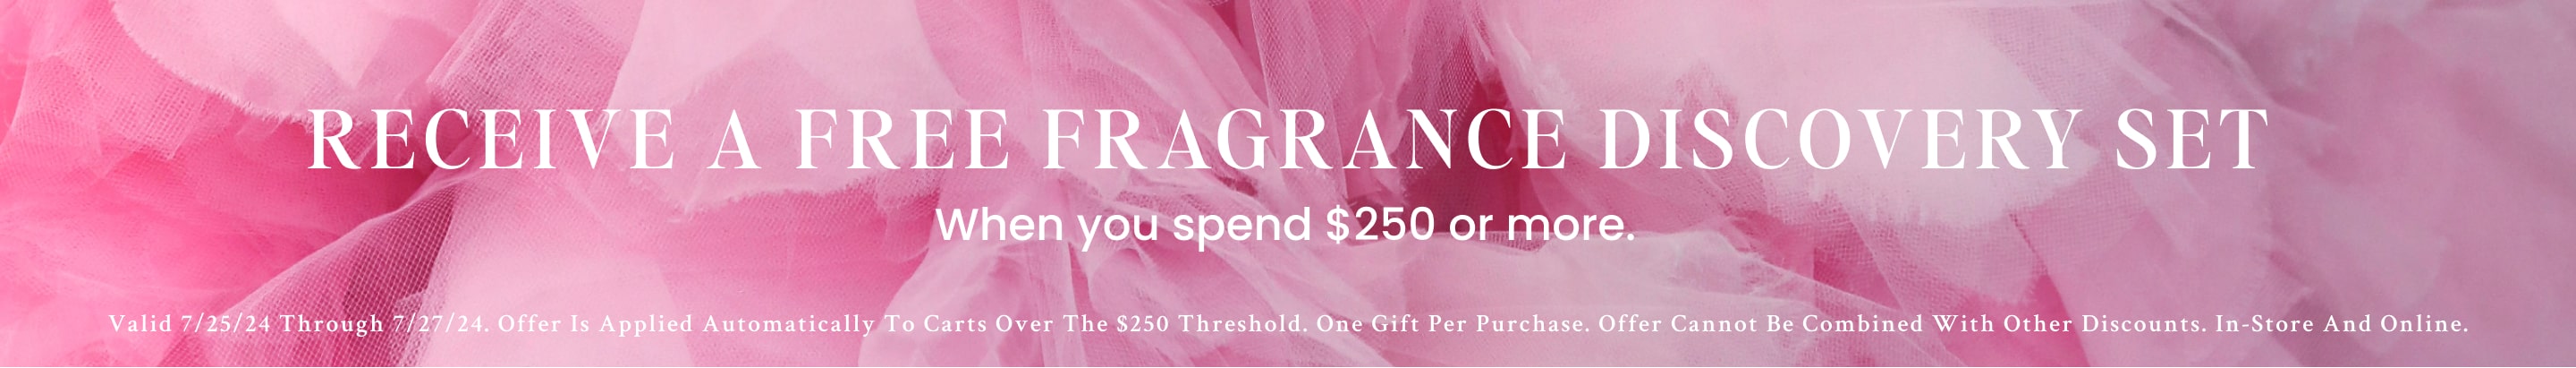 Receive a free Fragrance Discovery Set when you spend $250 or more.